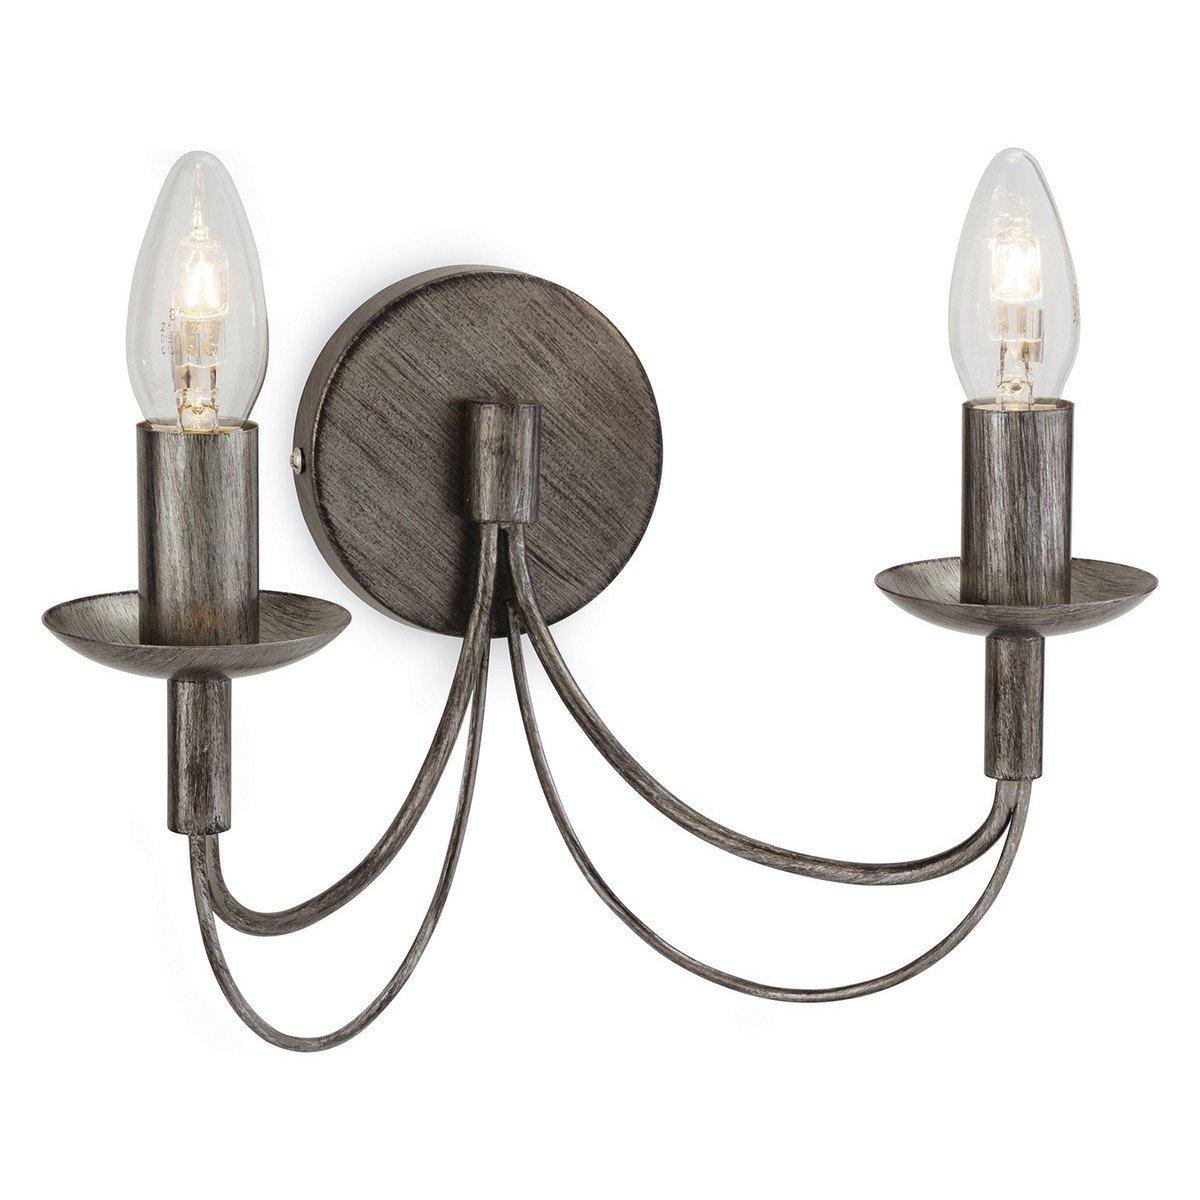 Regency 2 Light Indoor Candle Wall Light Antique Silver E14